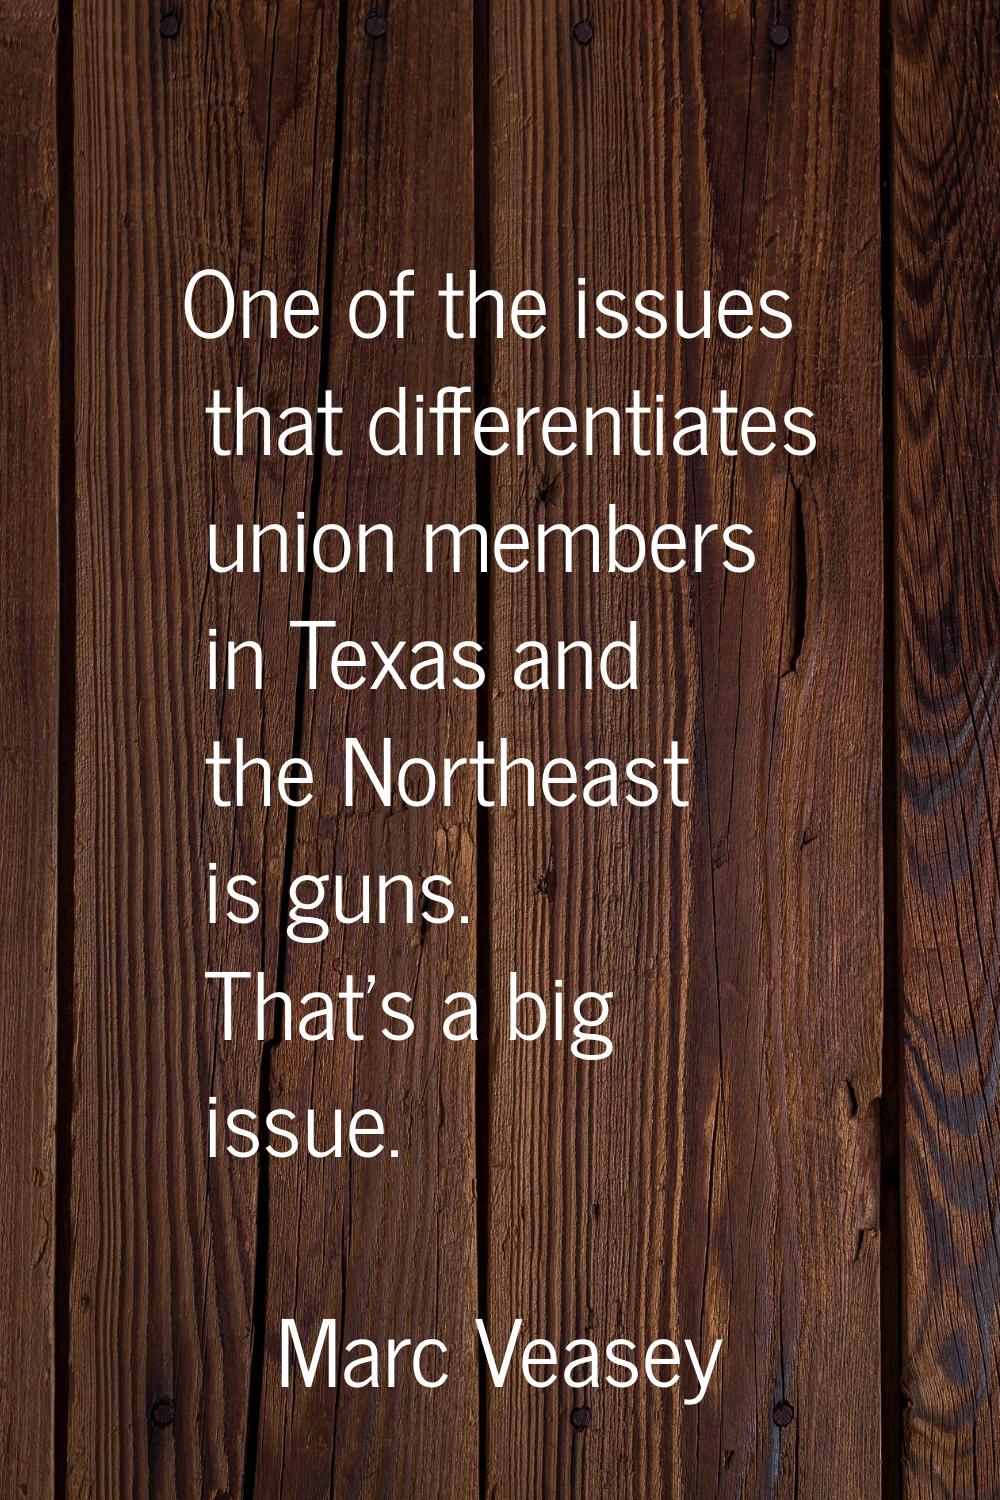 One of the issues that differentiates union members in Texas and the Northeast is guns. That's a bi